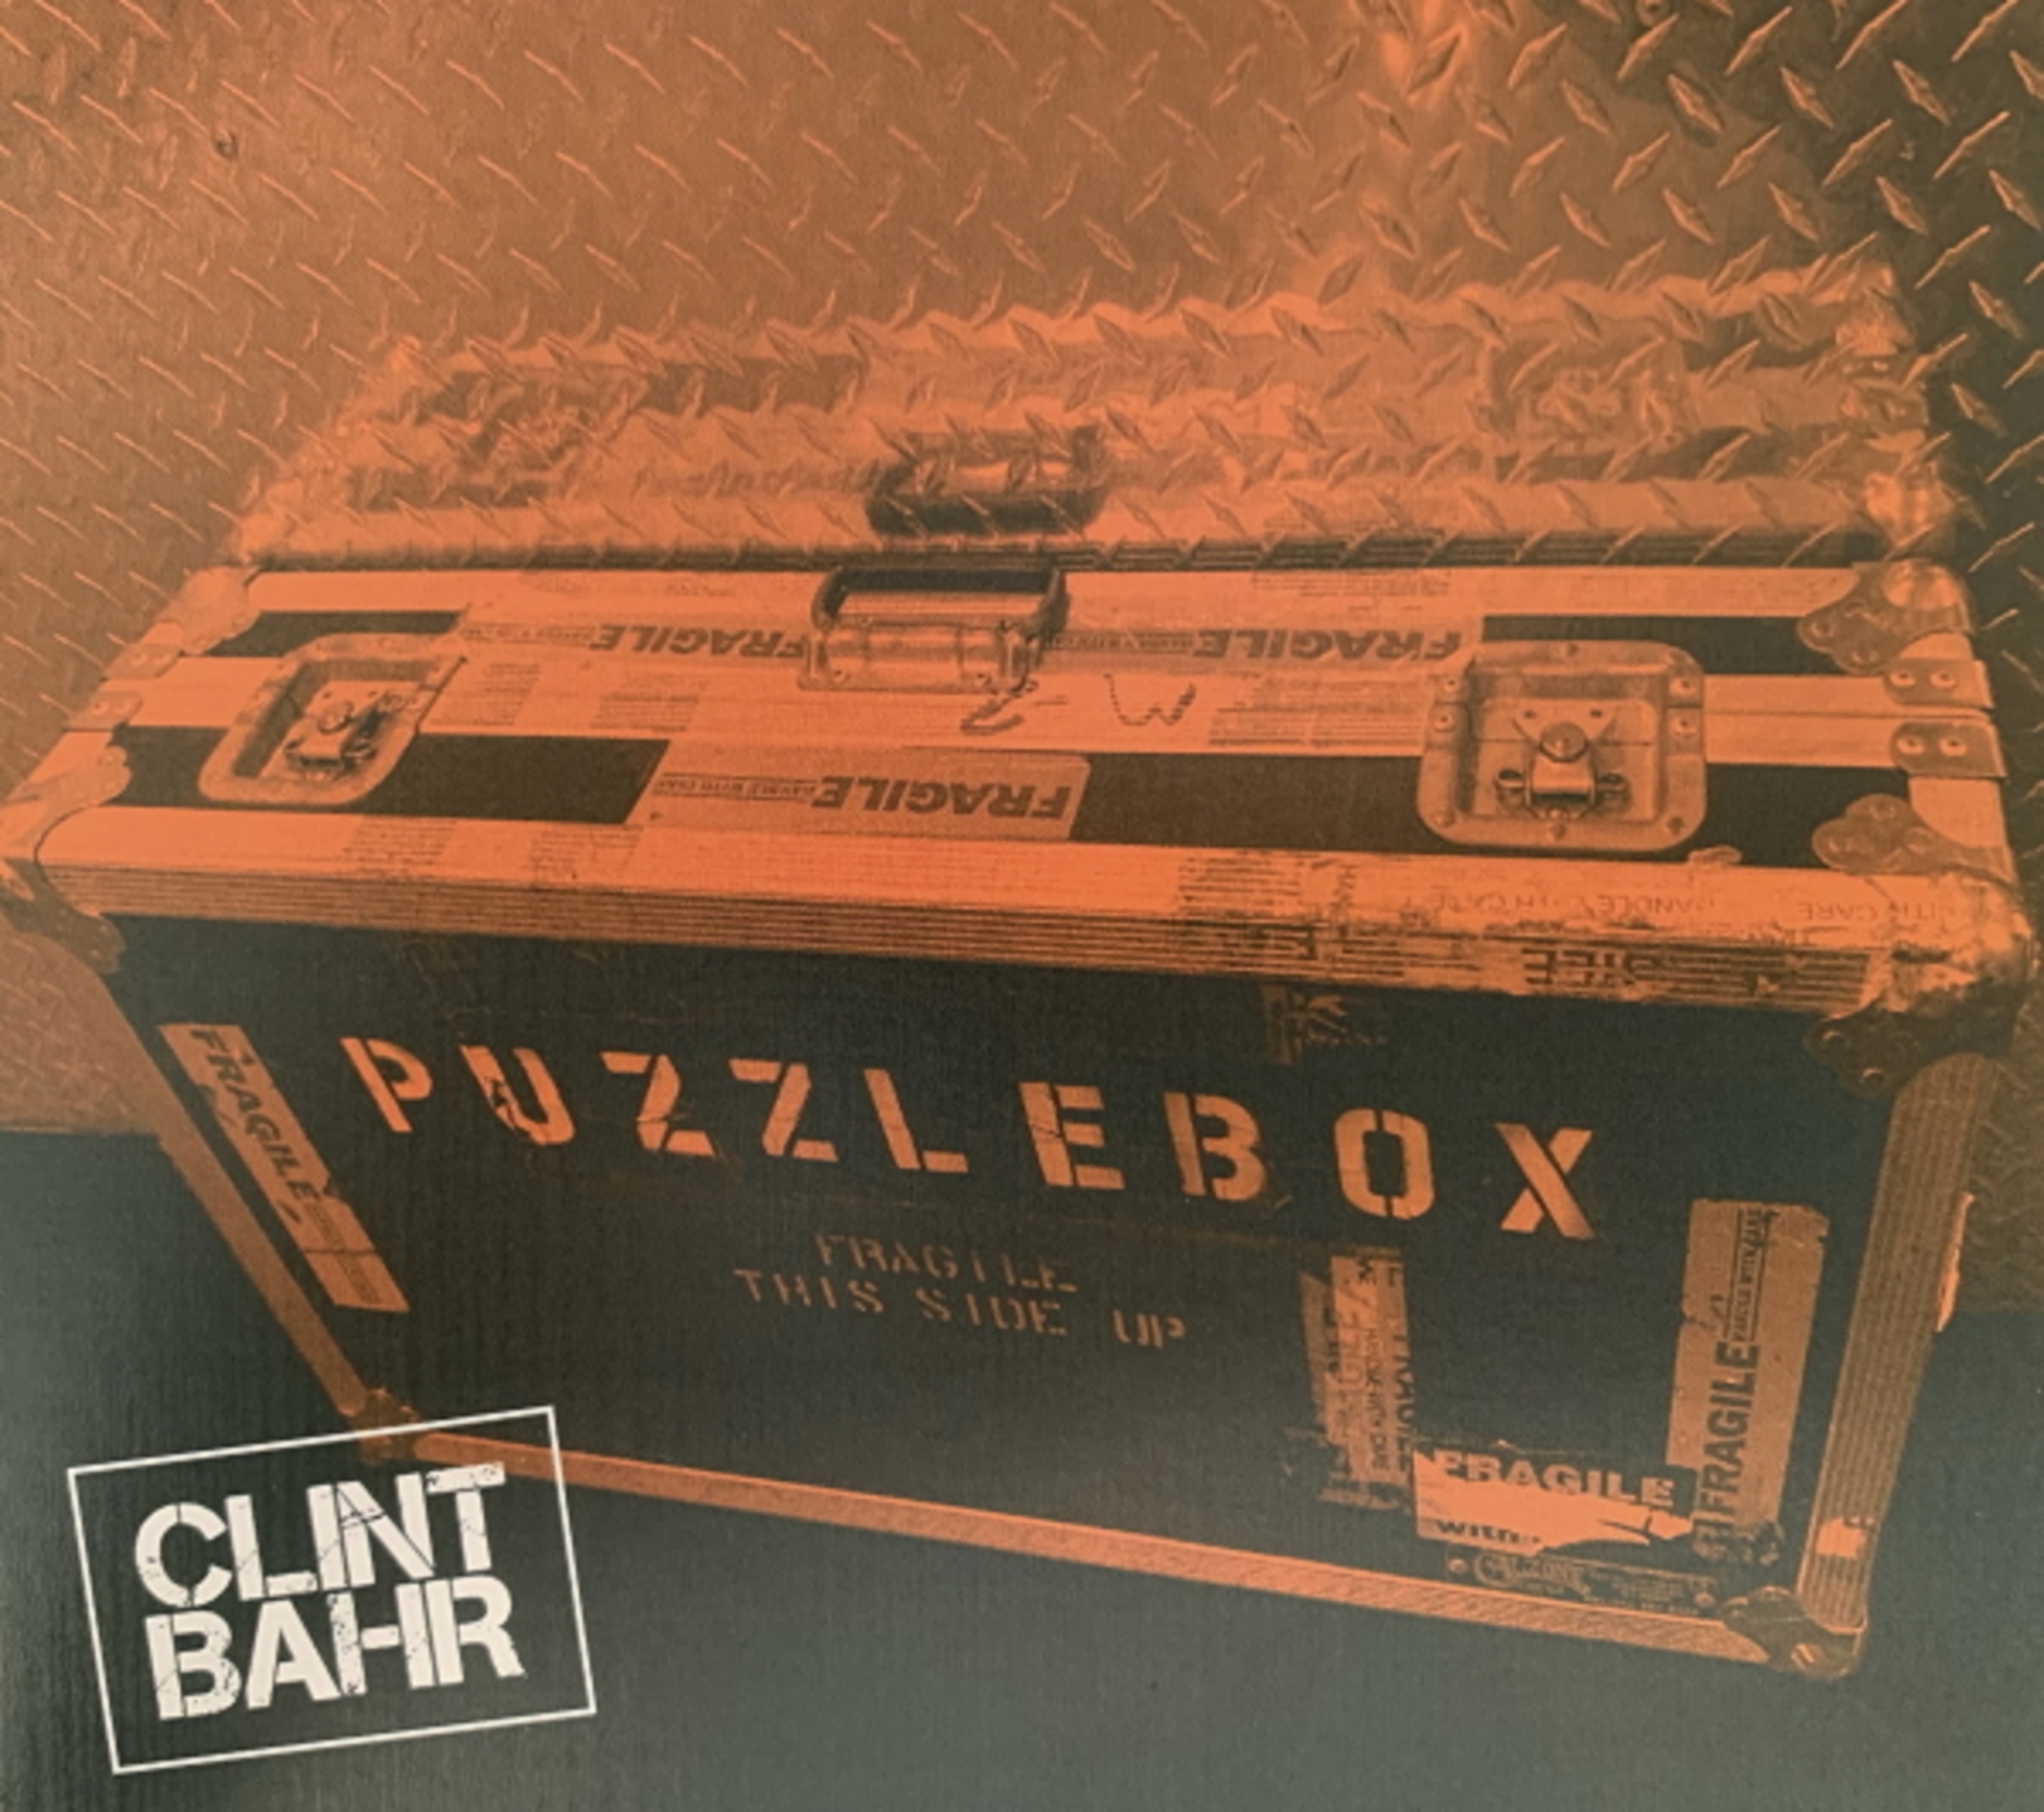 Bass Virtuoso Clint Bahr Releases New Solo Album “PUZZLEBOX” Feat. Members of King Crimson, YES, Van Der Graaf Generator, Sun Ra and Others!